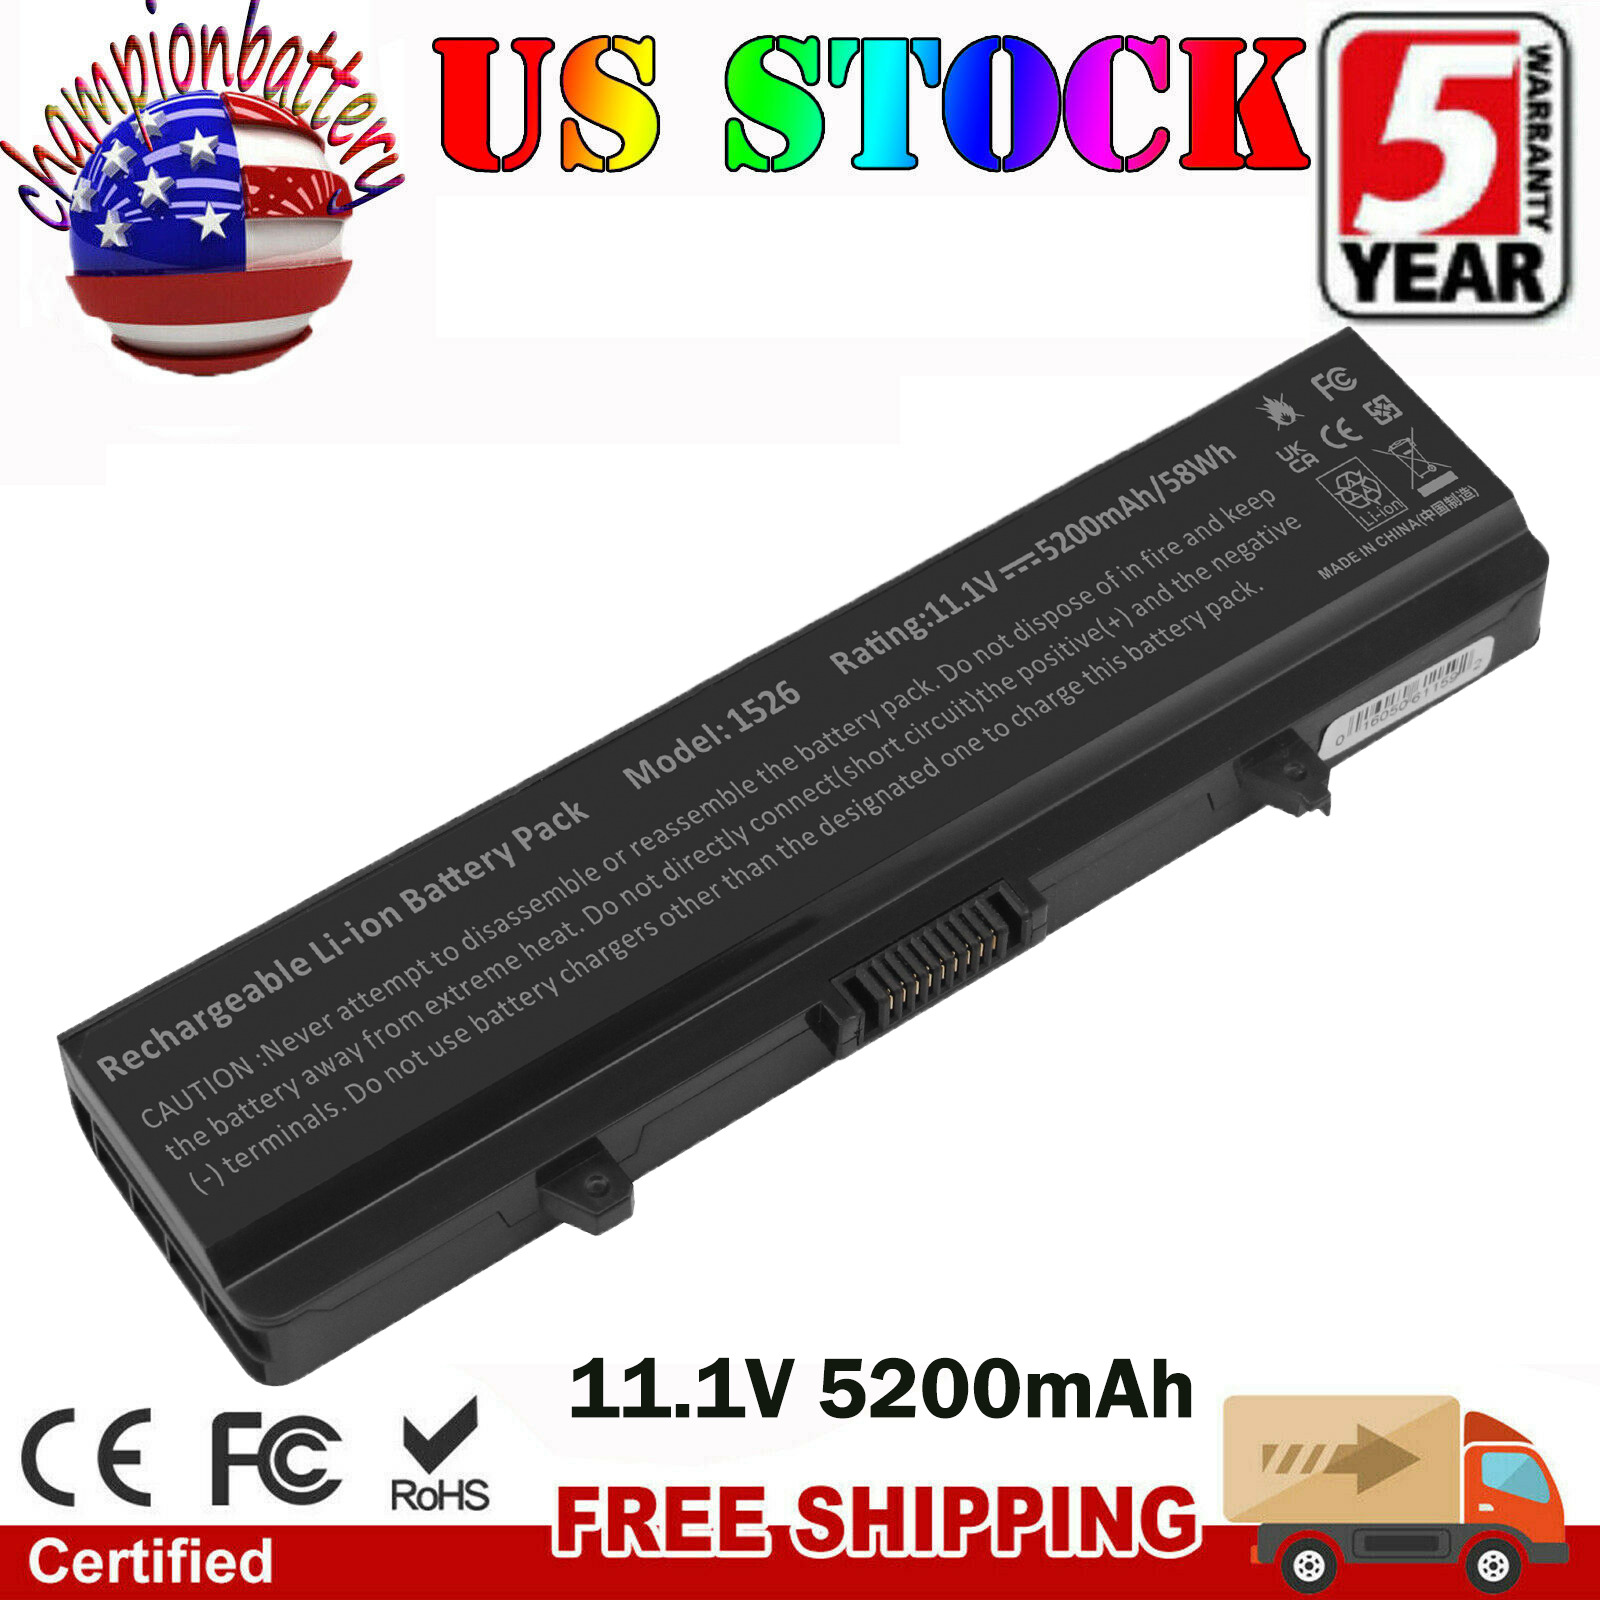 Lot Battery for Dell Inspiron 1526 1525 1545 1546 1750 1440 Pp29l Pp41l X284g